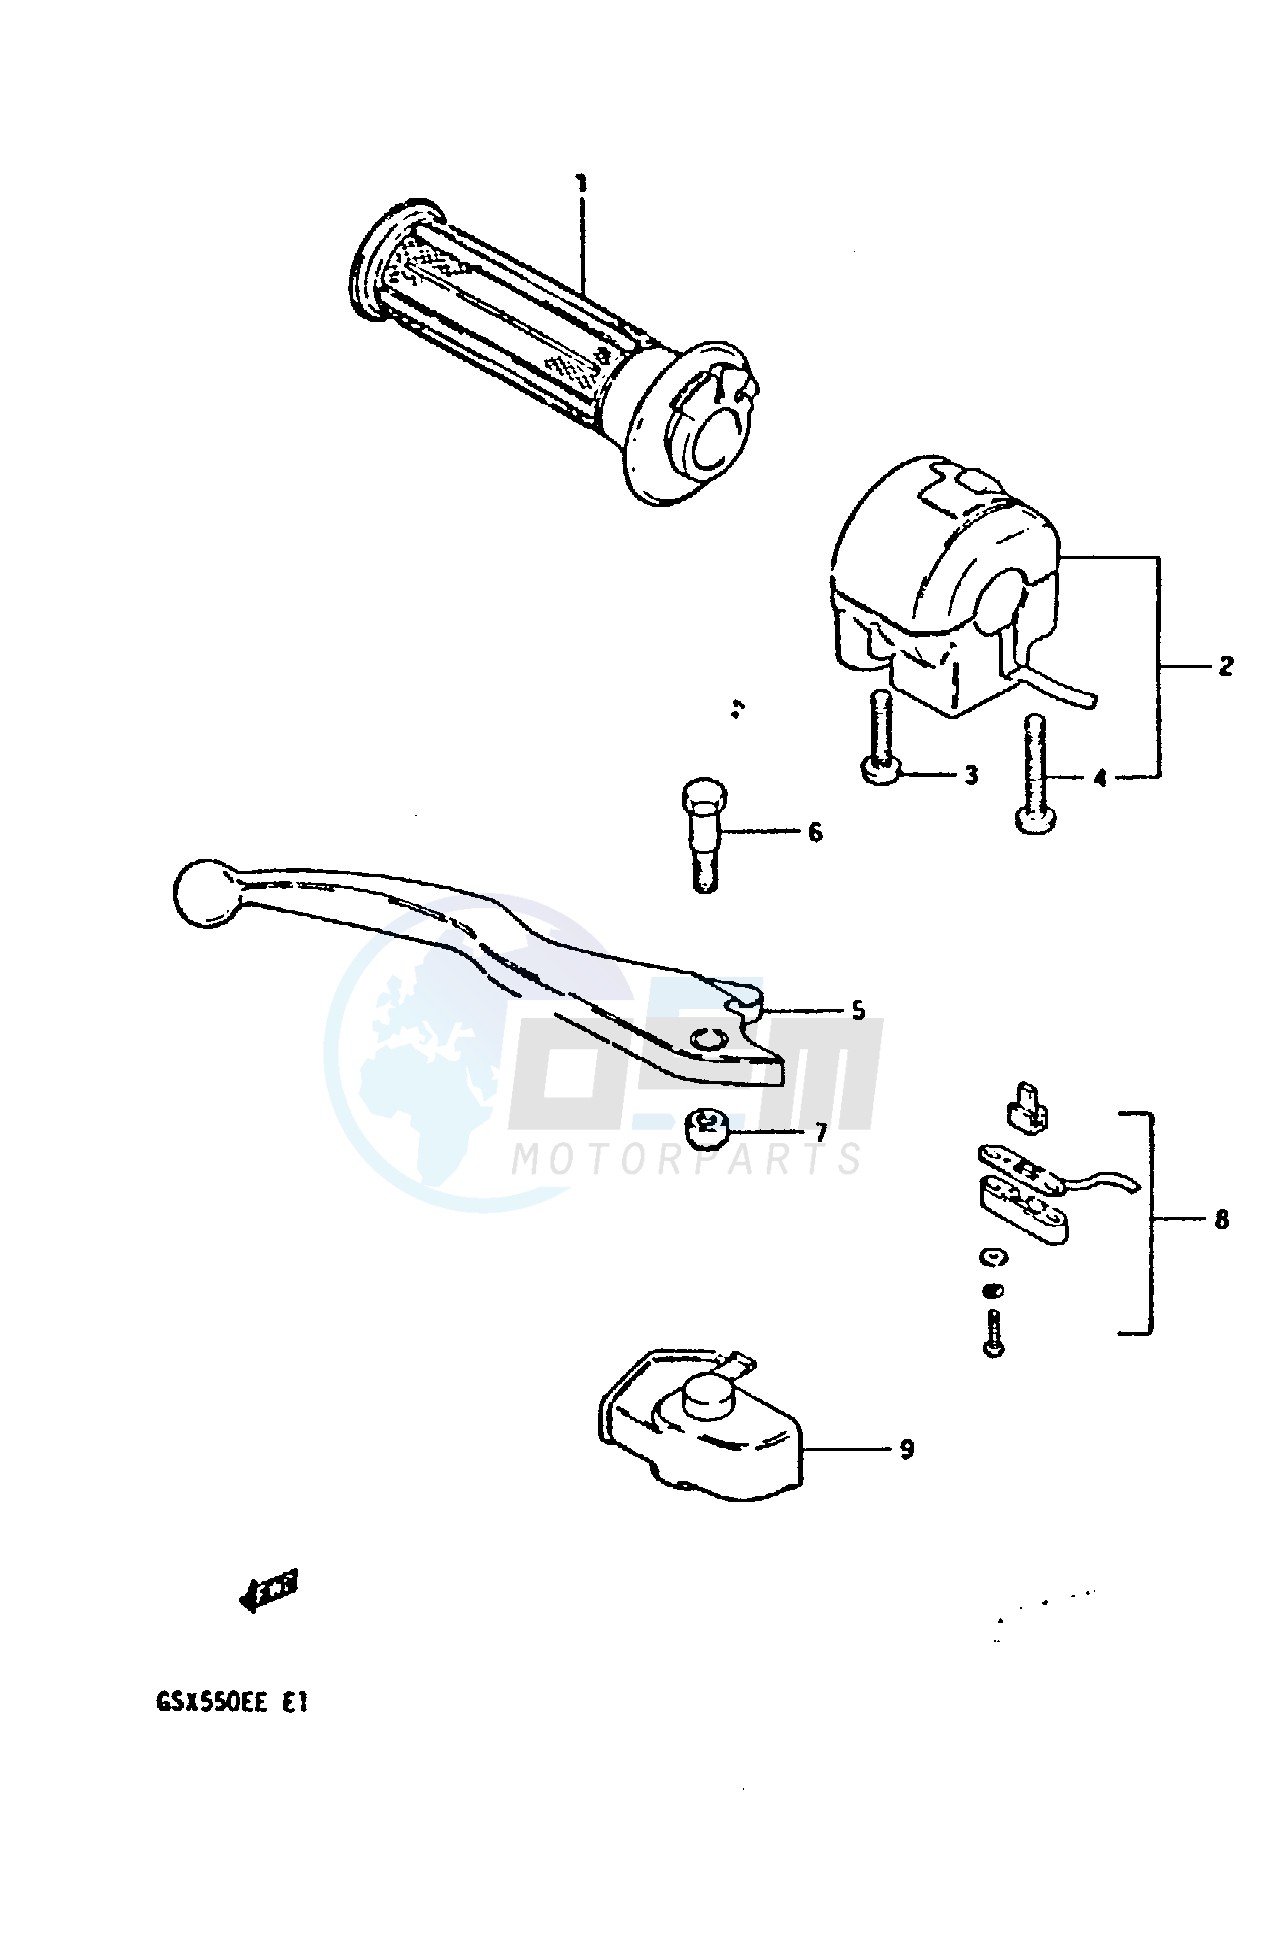 RIGHT HANDLE SWITCH (GSX550ED EE) blueprint